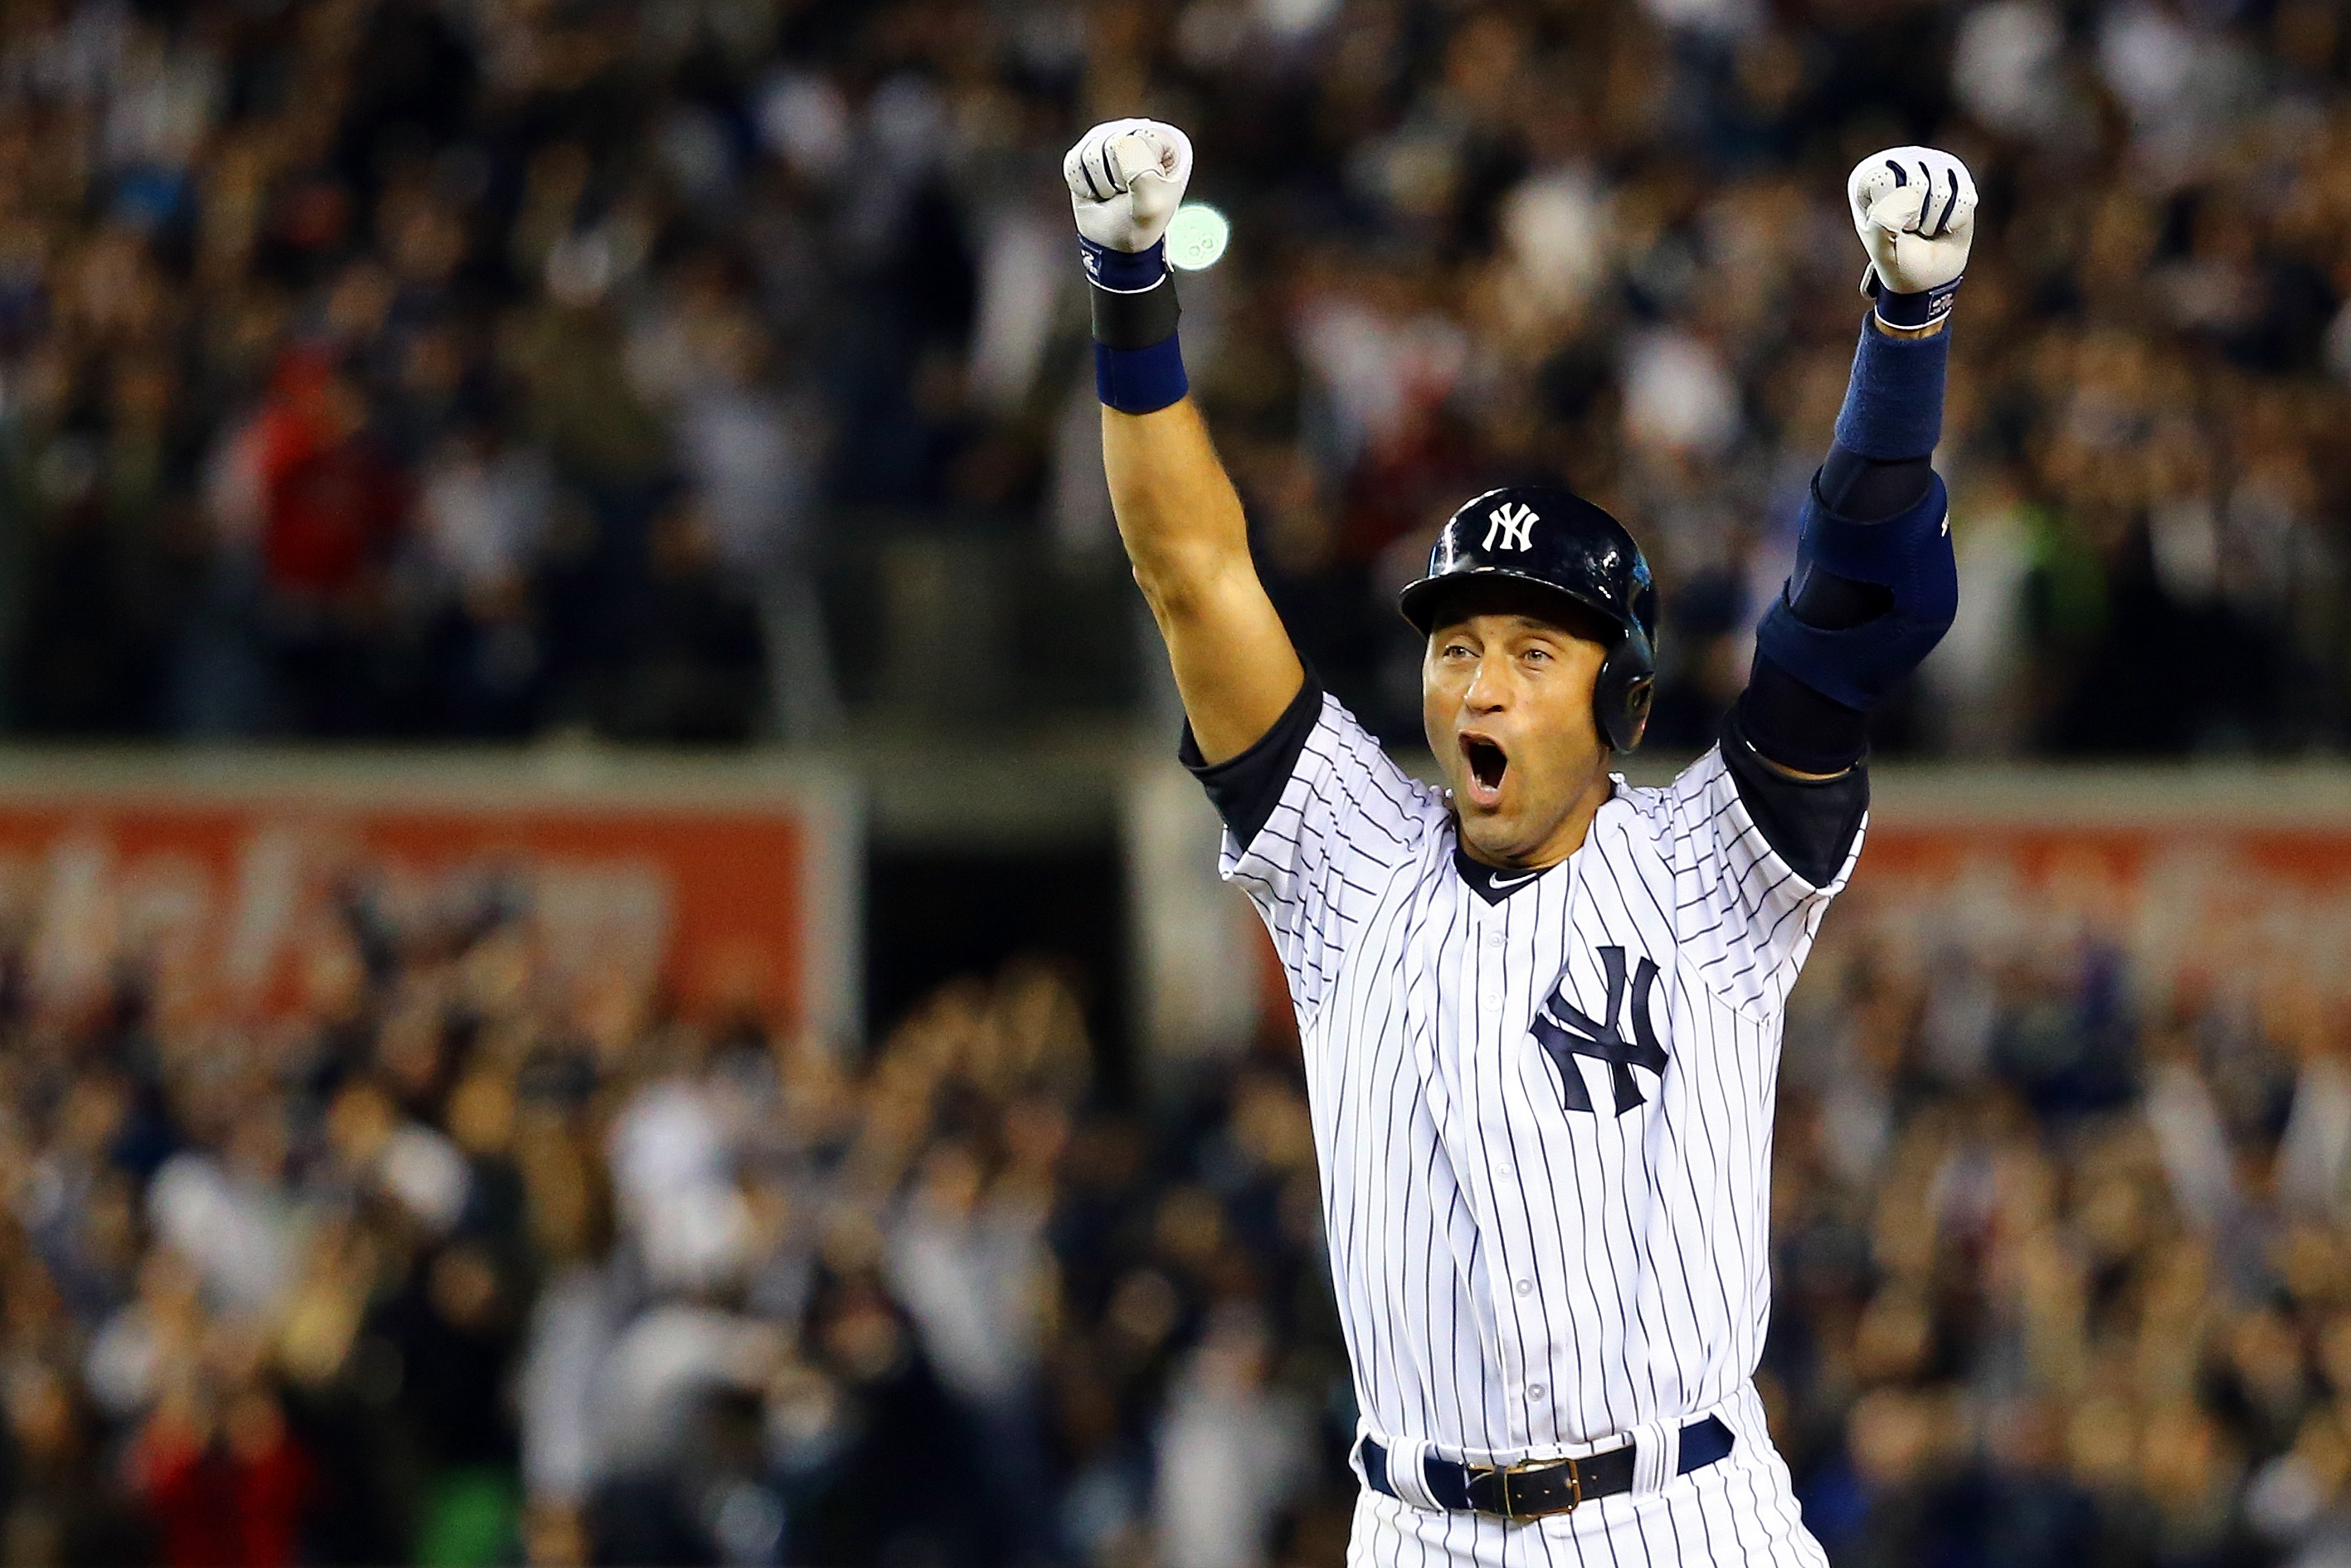 NEW YORK, NY - SEPTEMBER 25: Derek Jeter #2 of the New York Yankees celebrates after a game winning RBI hit in the ninth inning against the Baltimore Orioles in his last game ever at Yankee Stadium on September 25, 2014 in the Bronx borough of New York City. (Photo by Al Bello/Getty Images)